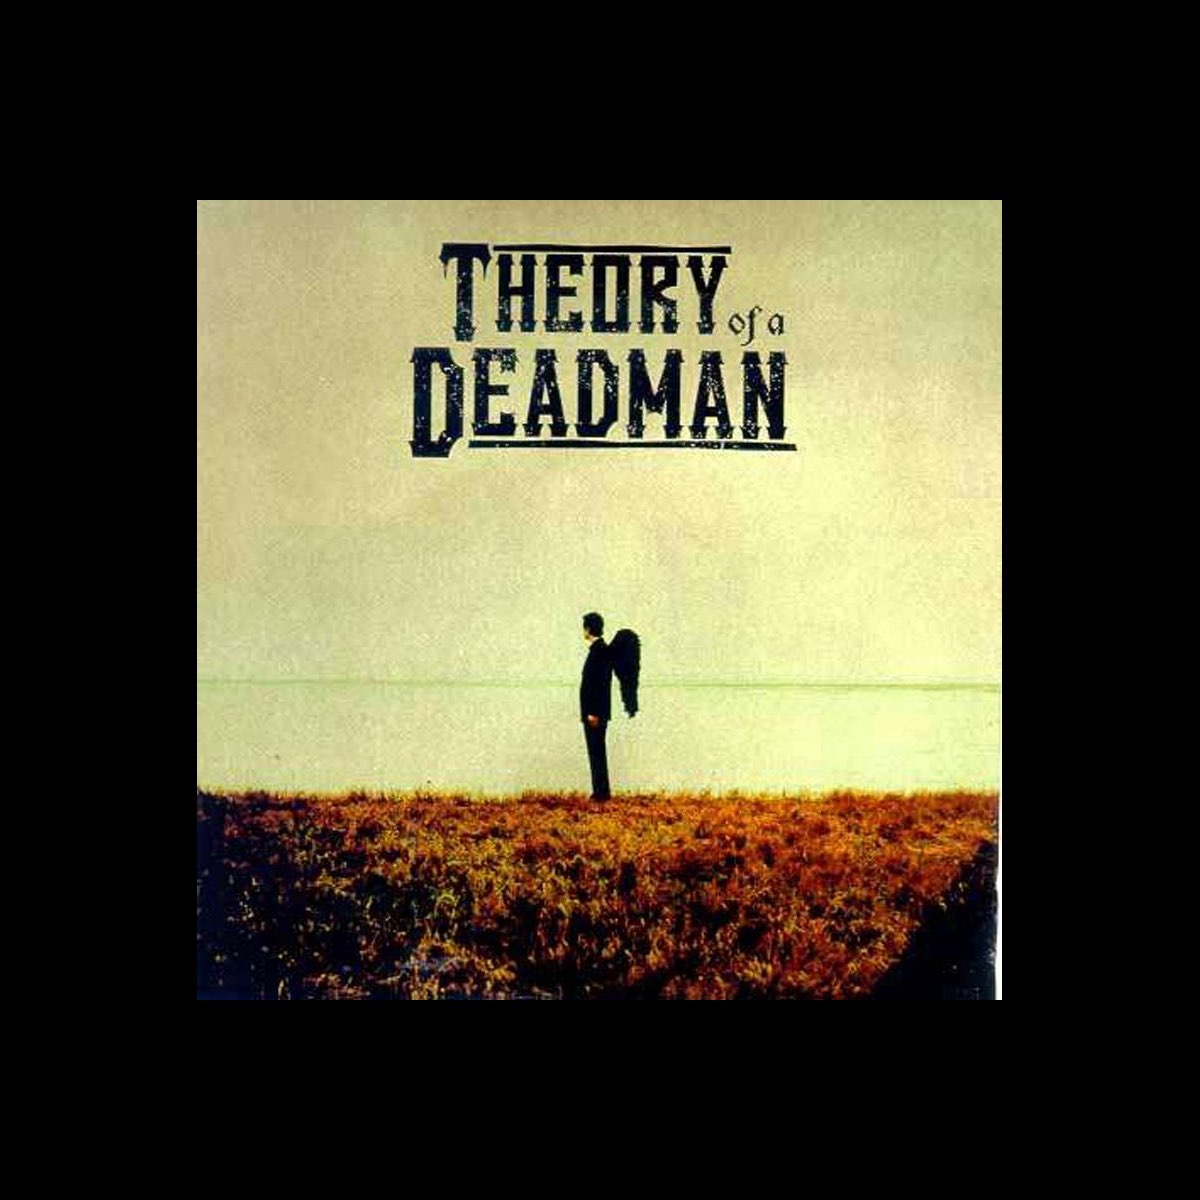 ‎Theory of a Deadman by Theory of a Deadman on Apple Music